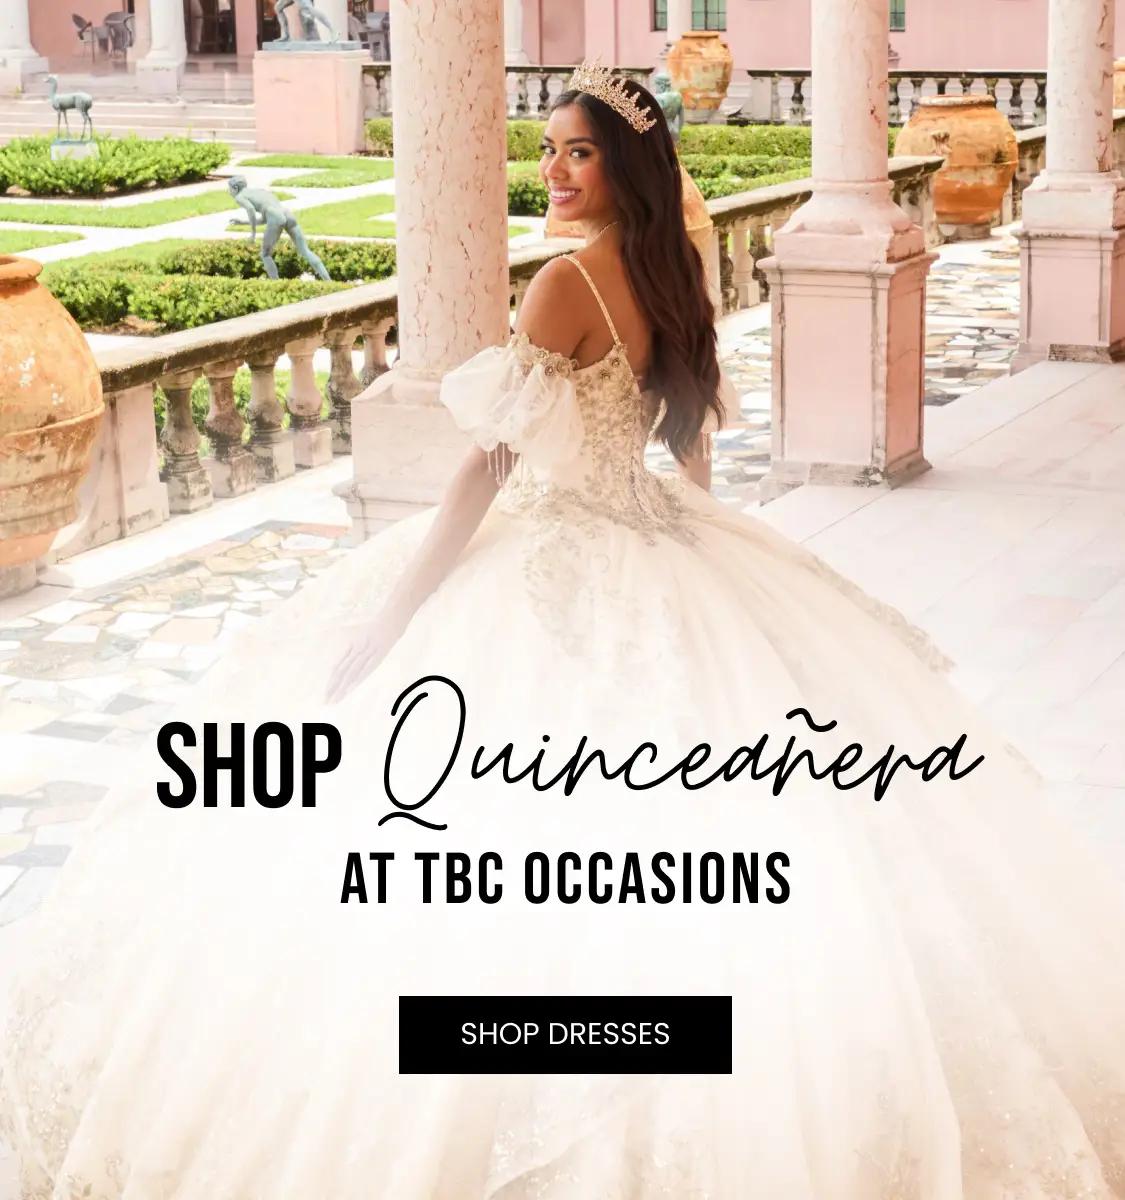 Quinceanera dresses at TBC Occasions in Colorado